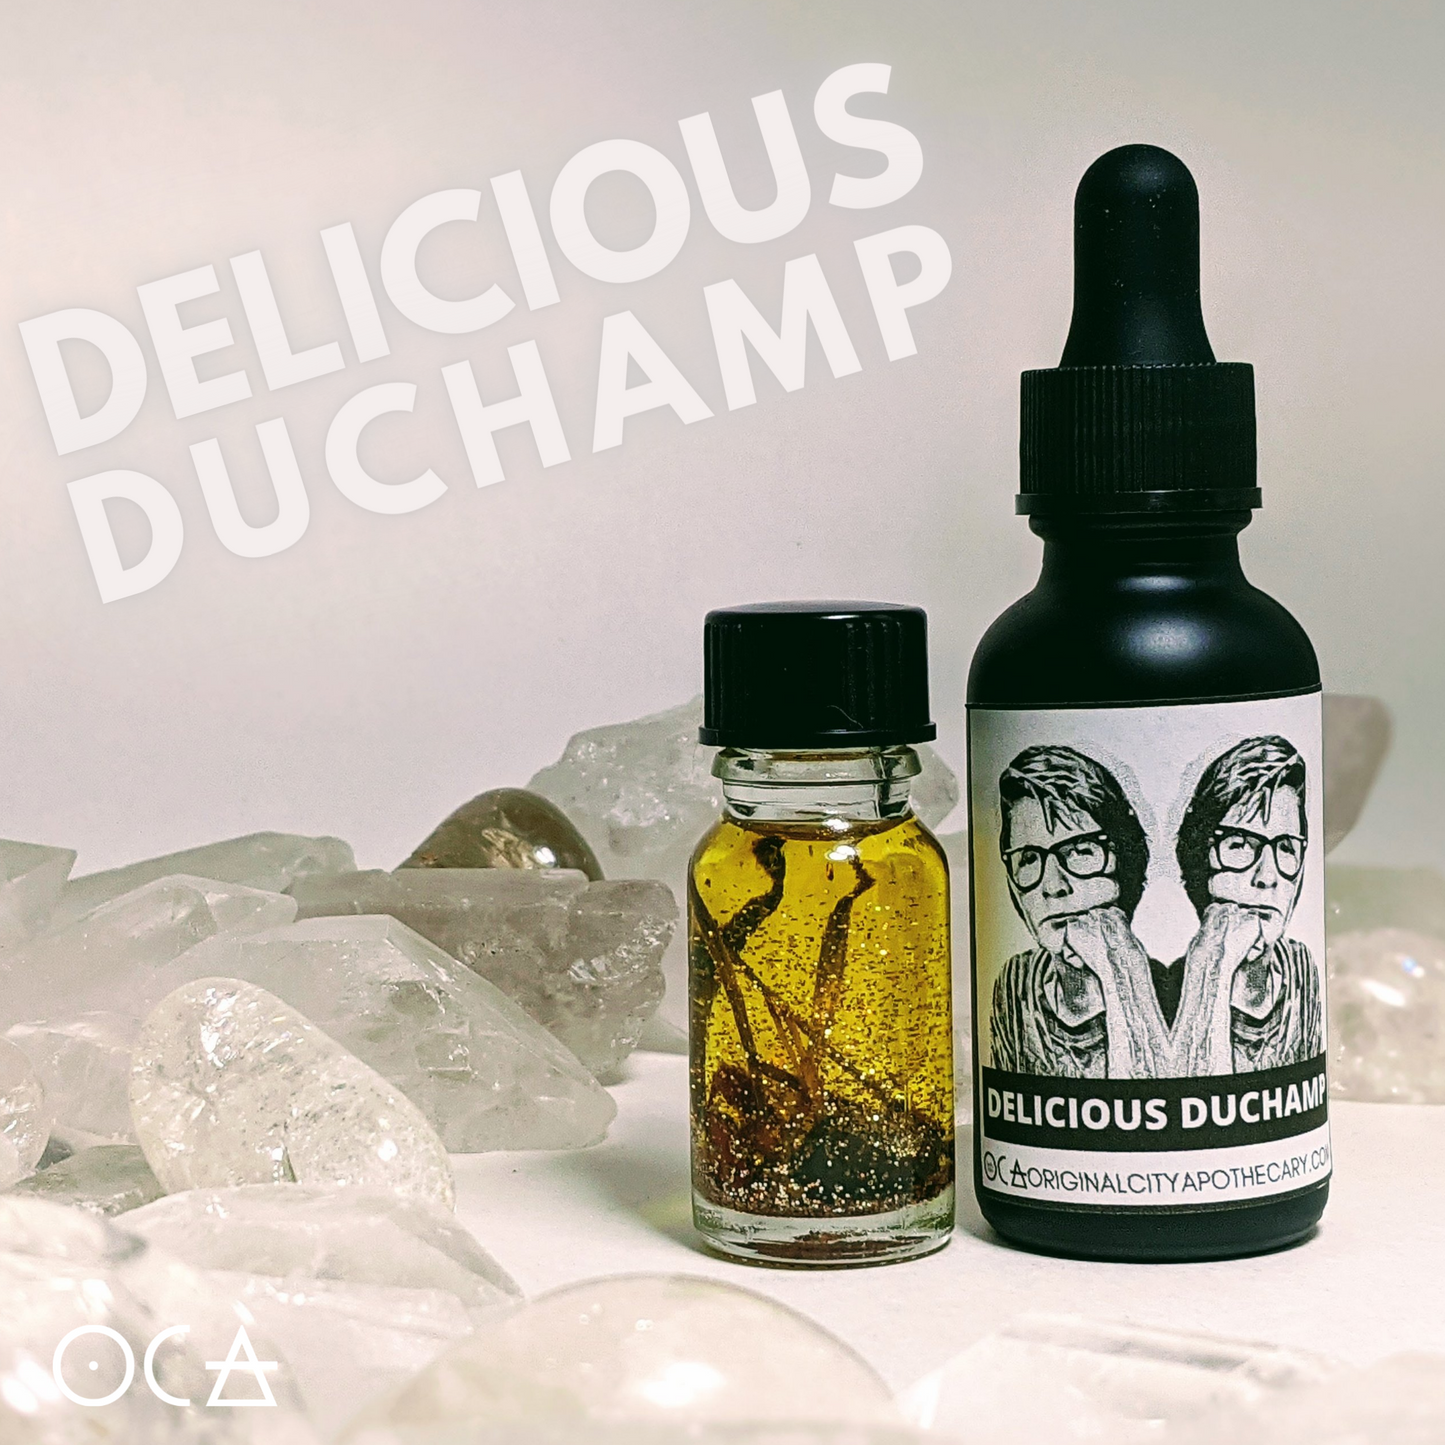 Delicious Duchamp Oil/Perfume/Cologne (inspired by Stand by Me)